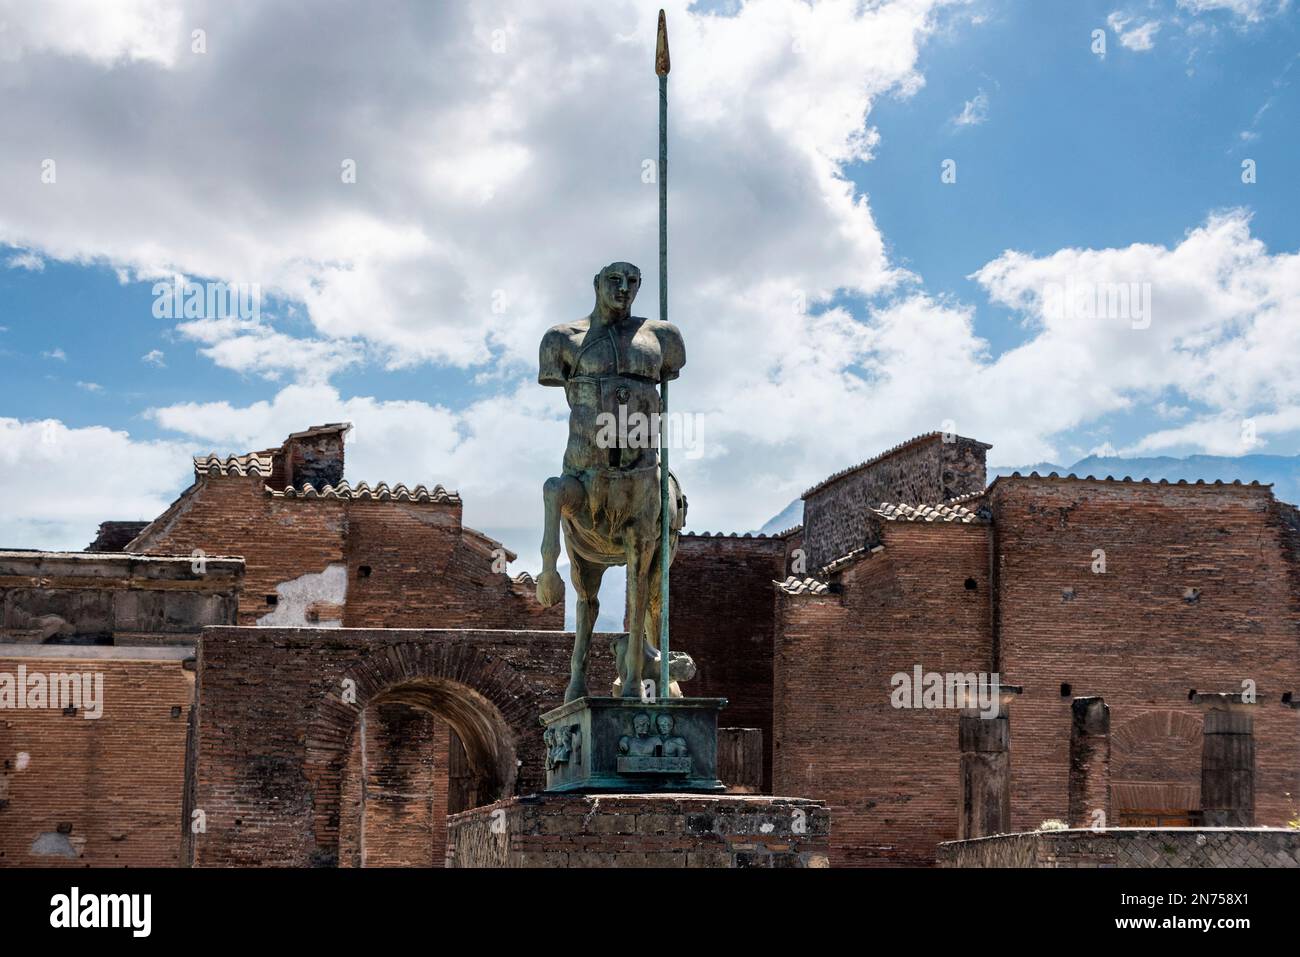 Beautiful statue of an ancient lancer on the forum of the ancient city of Pompeii, Southern Italy Stock Photo